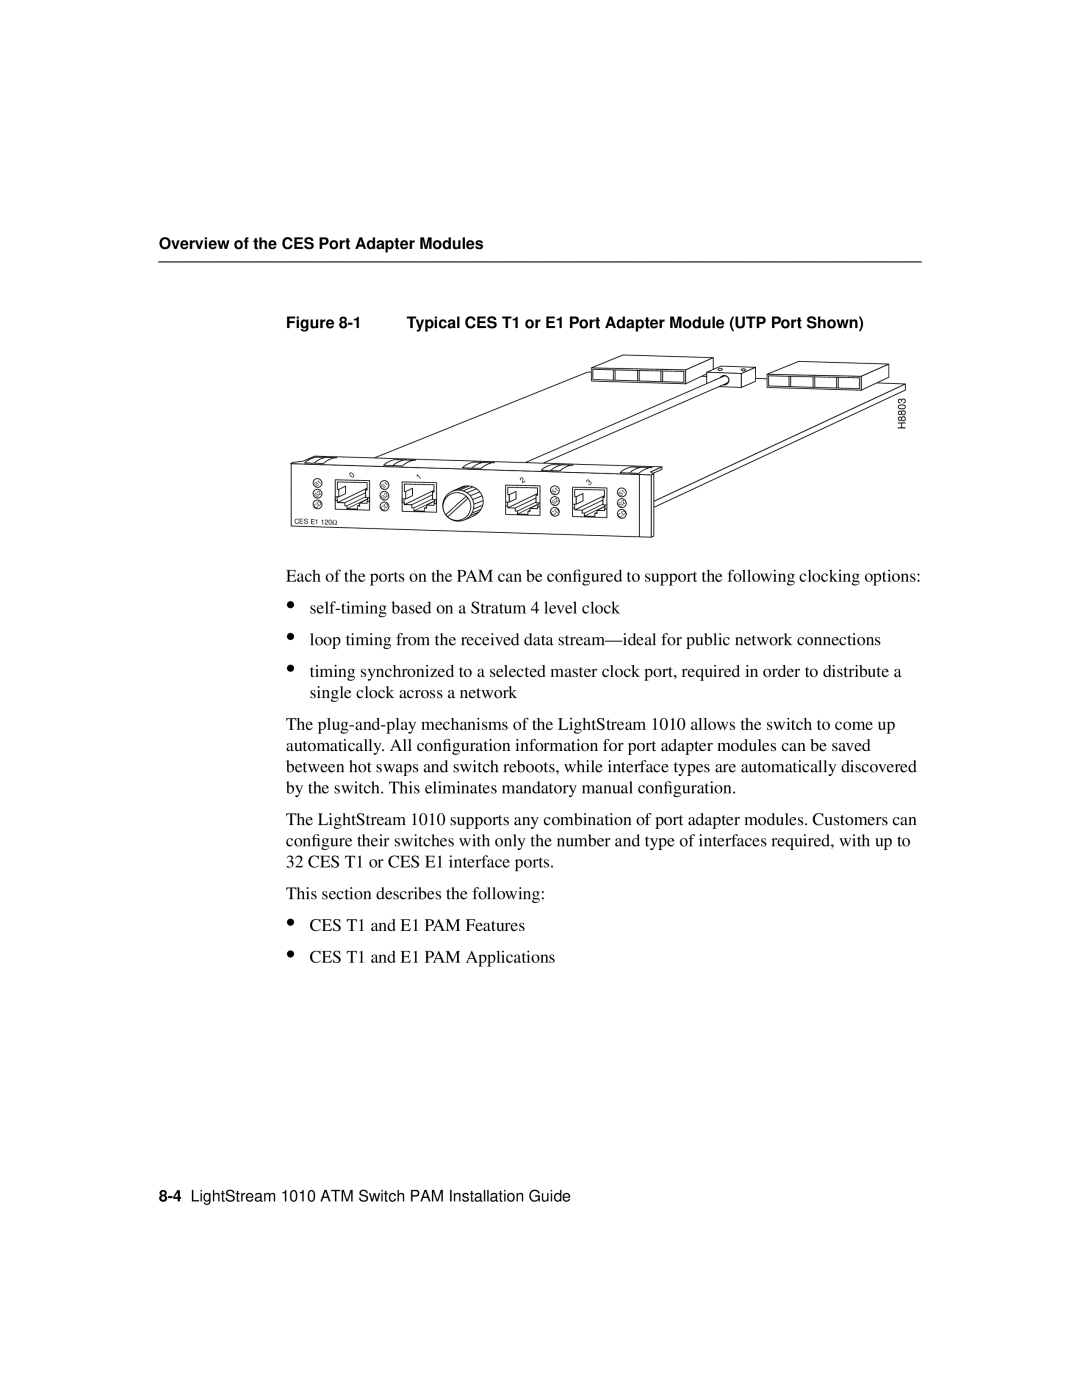 Cisco Systems 1010 manual self-timing based on a Stratum 4 level clock 